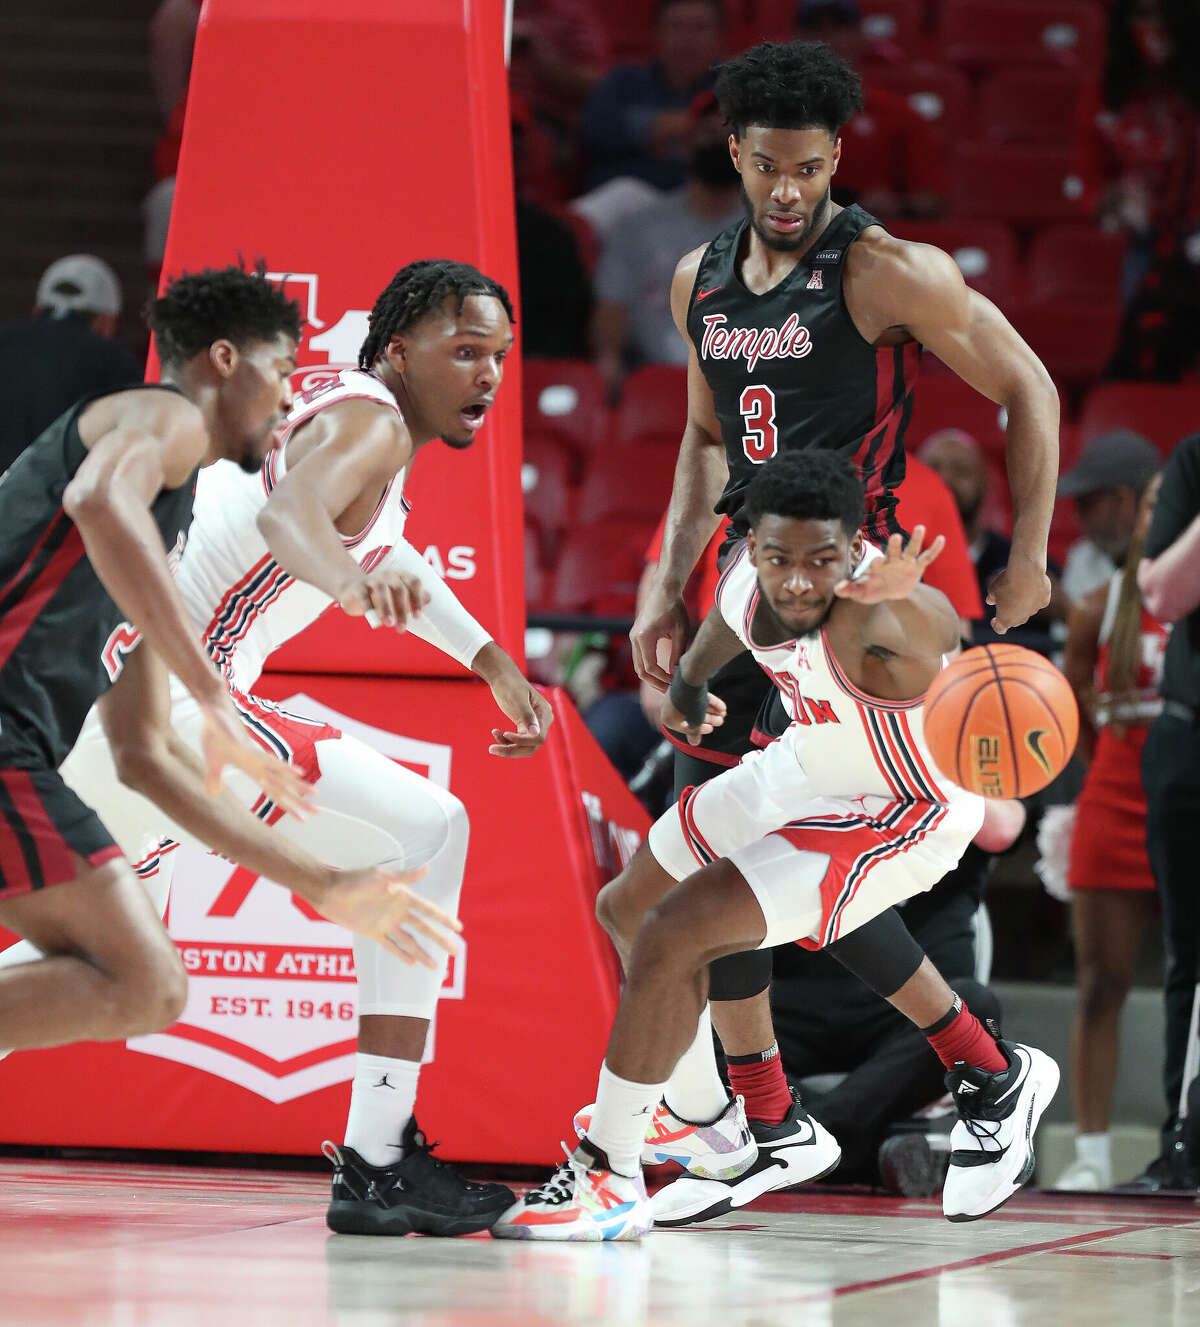 Houston Cougars guard Jamal Shead (1) reaches for a rebound against Temple Owls center Emmanuel Okpomo (21) during the first half of a men's NCAA basketball game at Fertitta Center on the University of Houston campus on Thursday, March 3, 2022 in Houston.